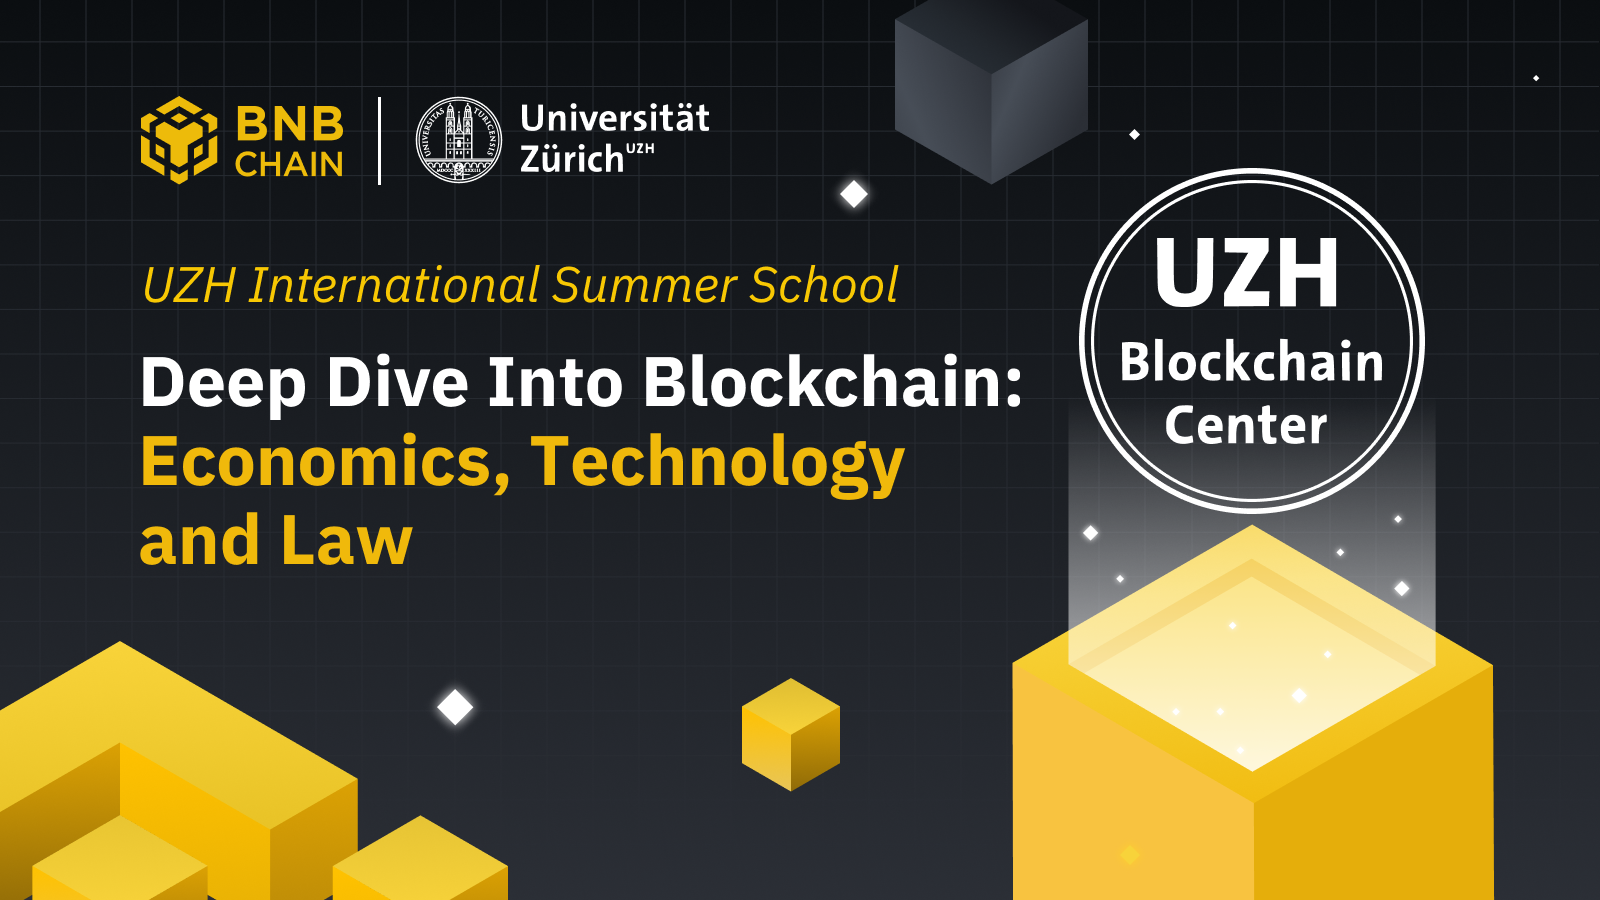 BNB Chain to Open ‘Deep Dive Into Blockchain’ Summer School Lectures at the University of Zurich